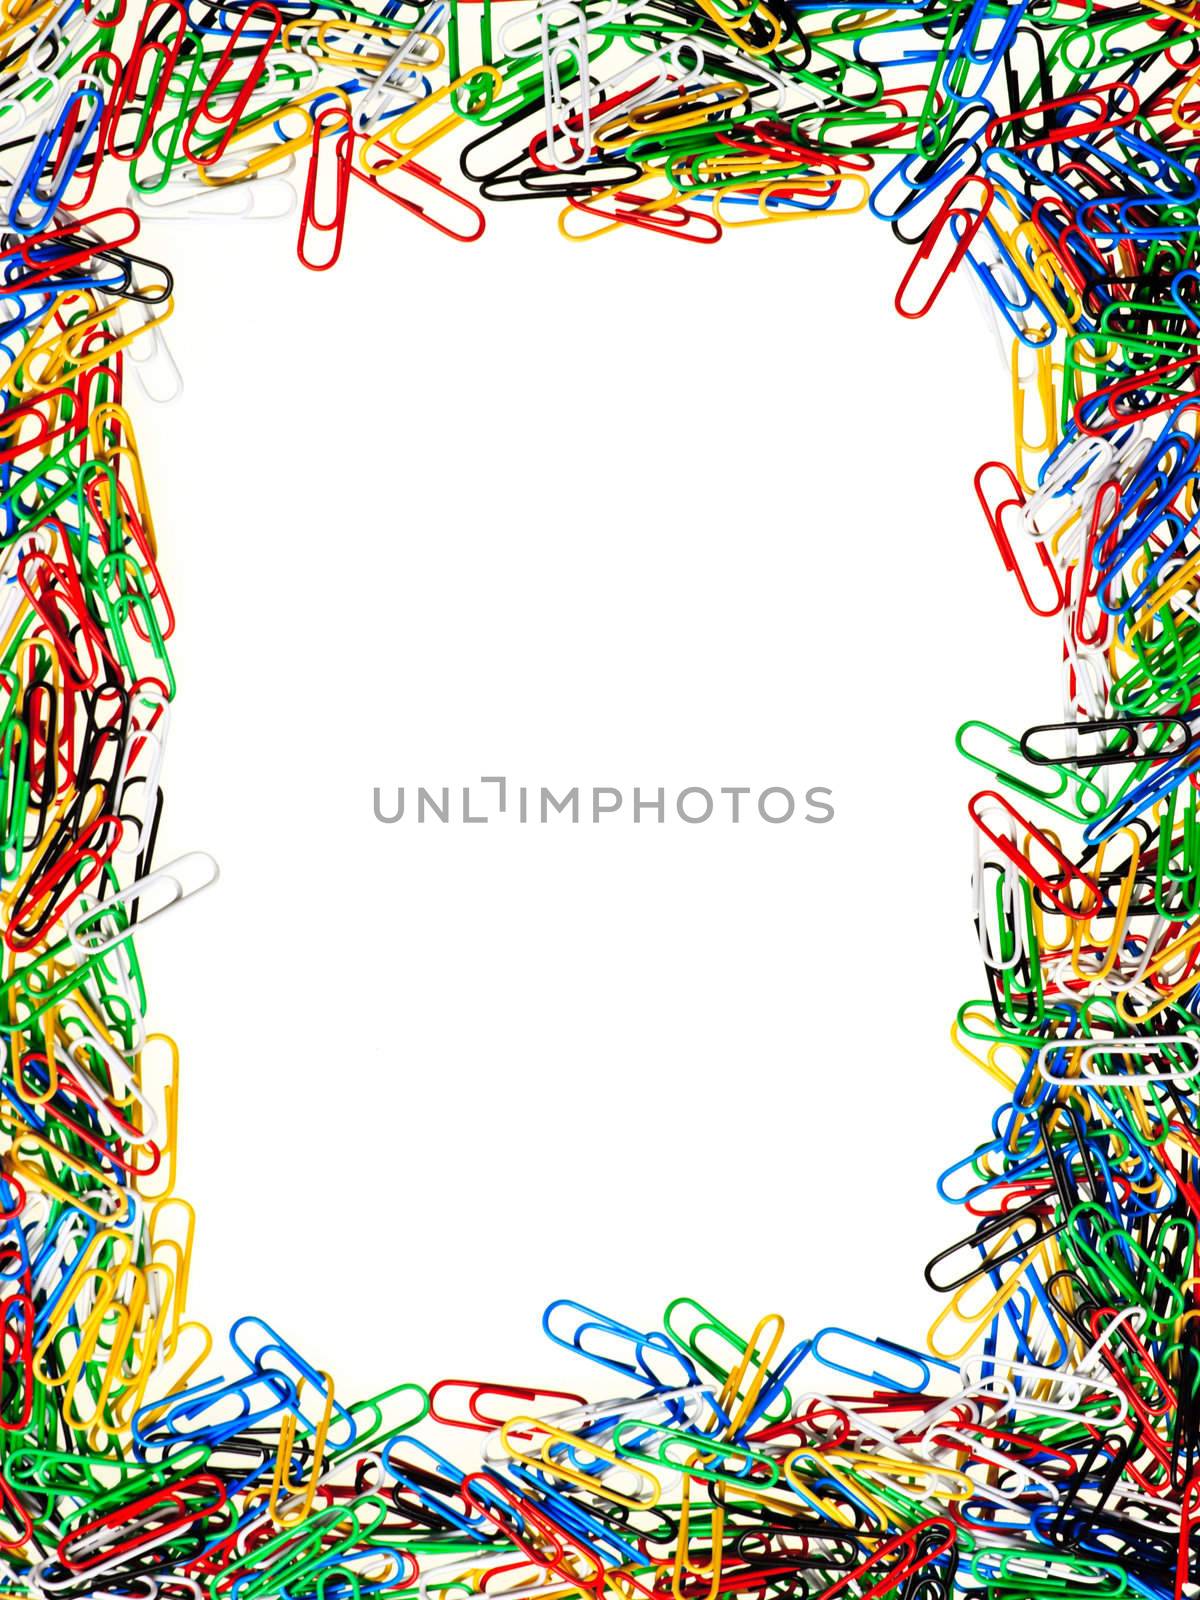 Paper clips frame by naumoid